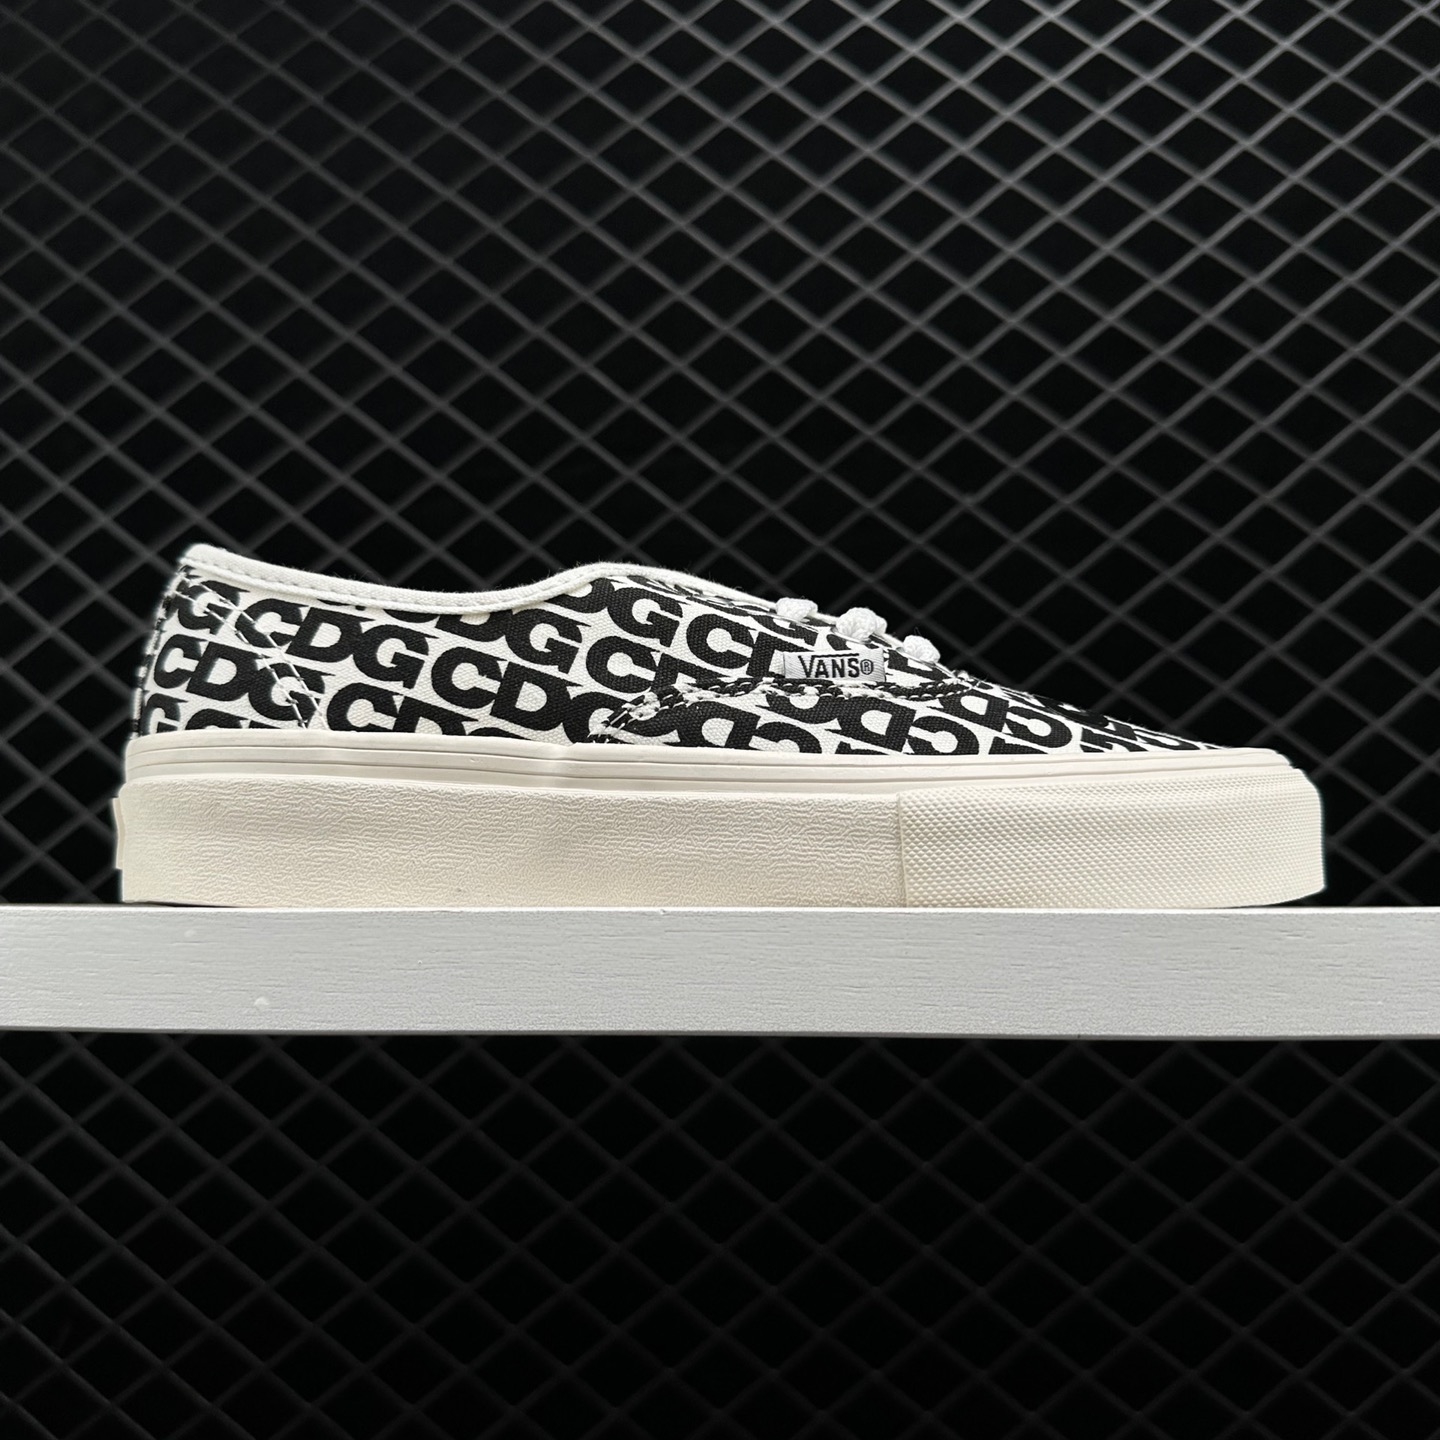 Vans Comme des x Authentic 'CDG' VN0A33TASHM - Limited Edition Collaboration Sneakers